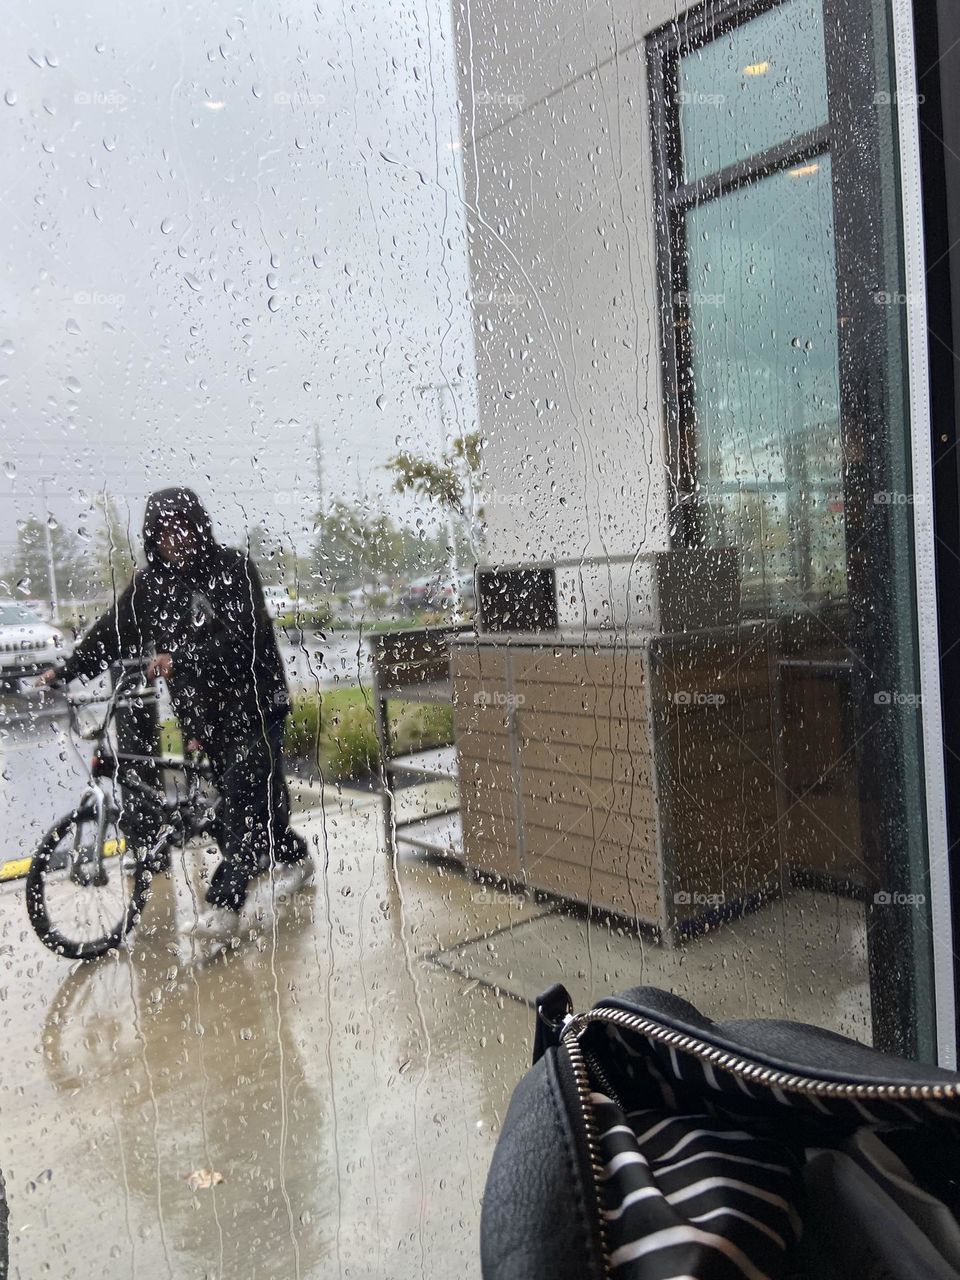 A man rides his bicycle outside a local Panera Bread restaurant on a recent rainy day. In NJ we were fortunate to only be getting much-needed rain, remnants of Hurricane Ian, which devastated Florida and South Carolina this week. Feeling grateful. 